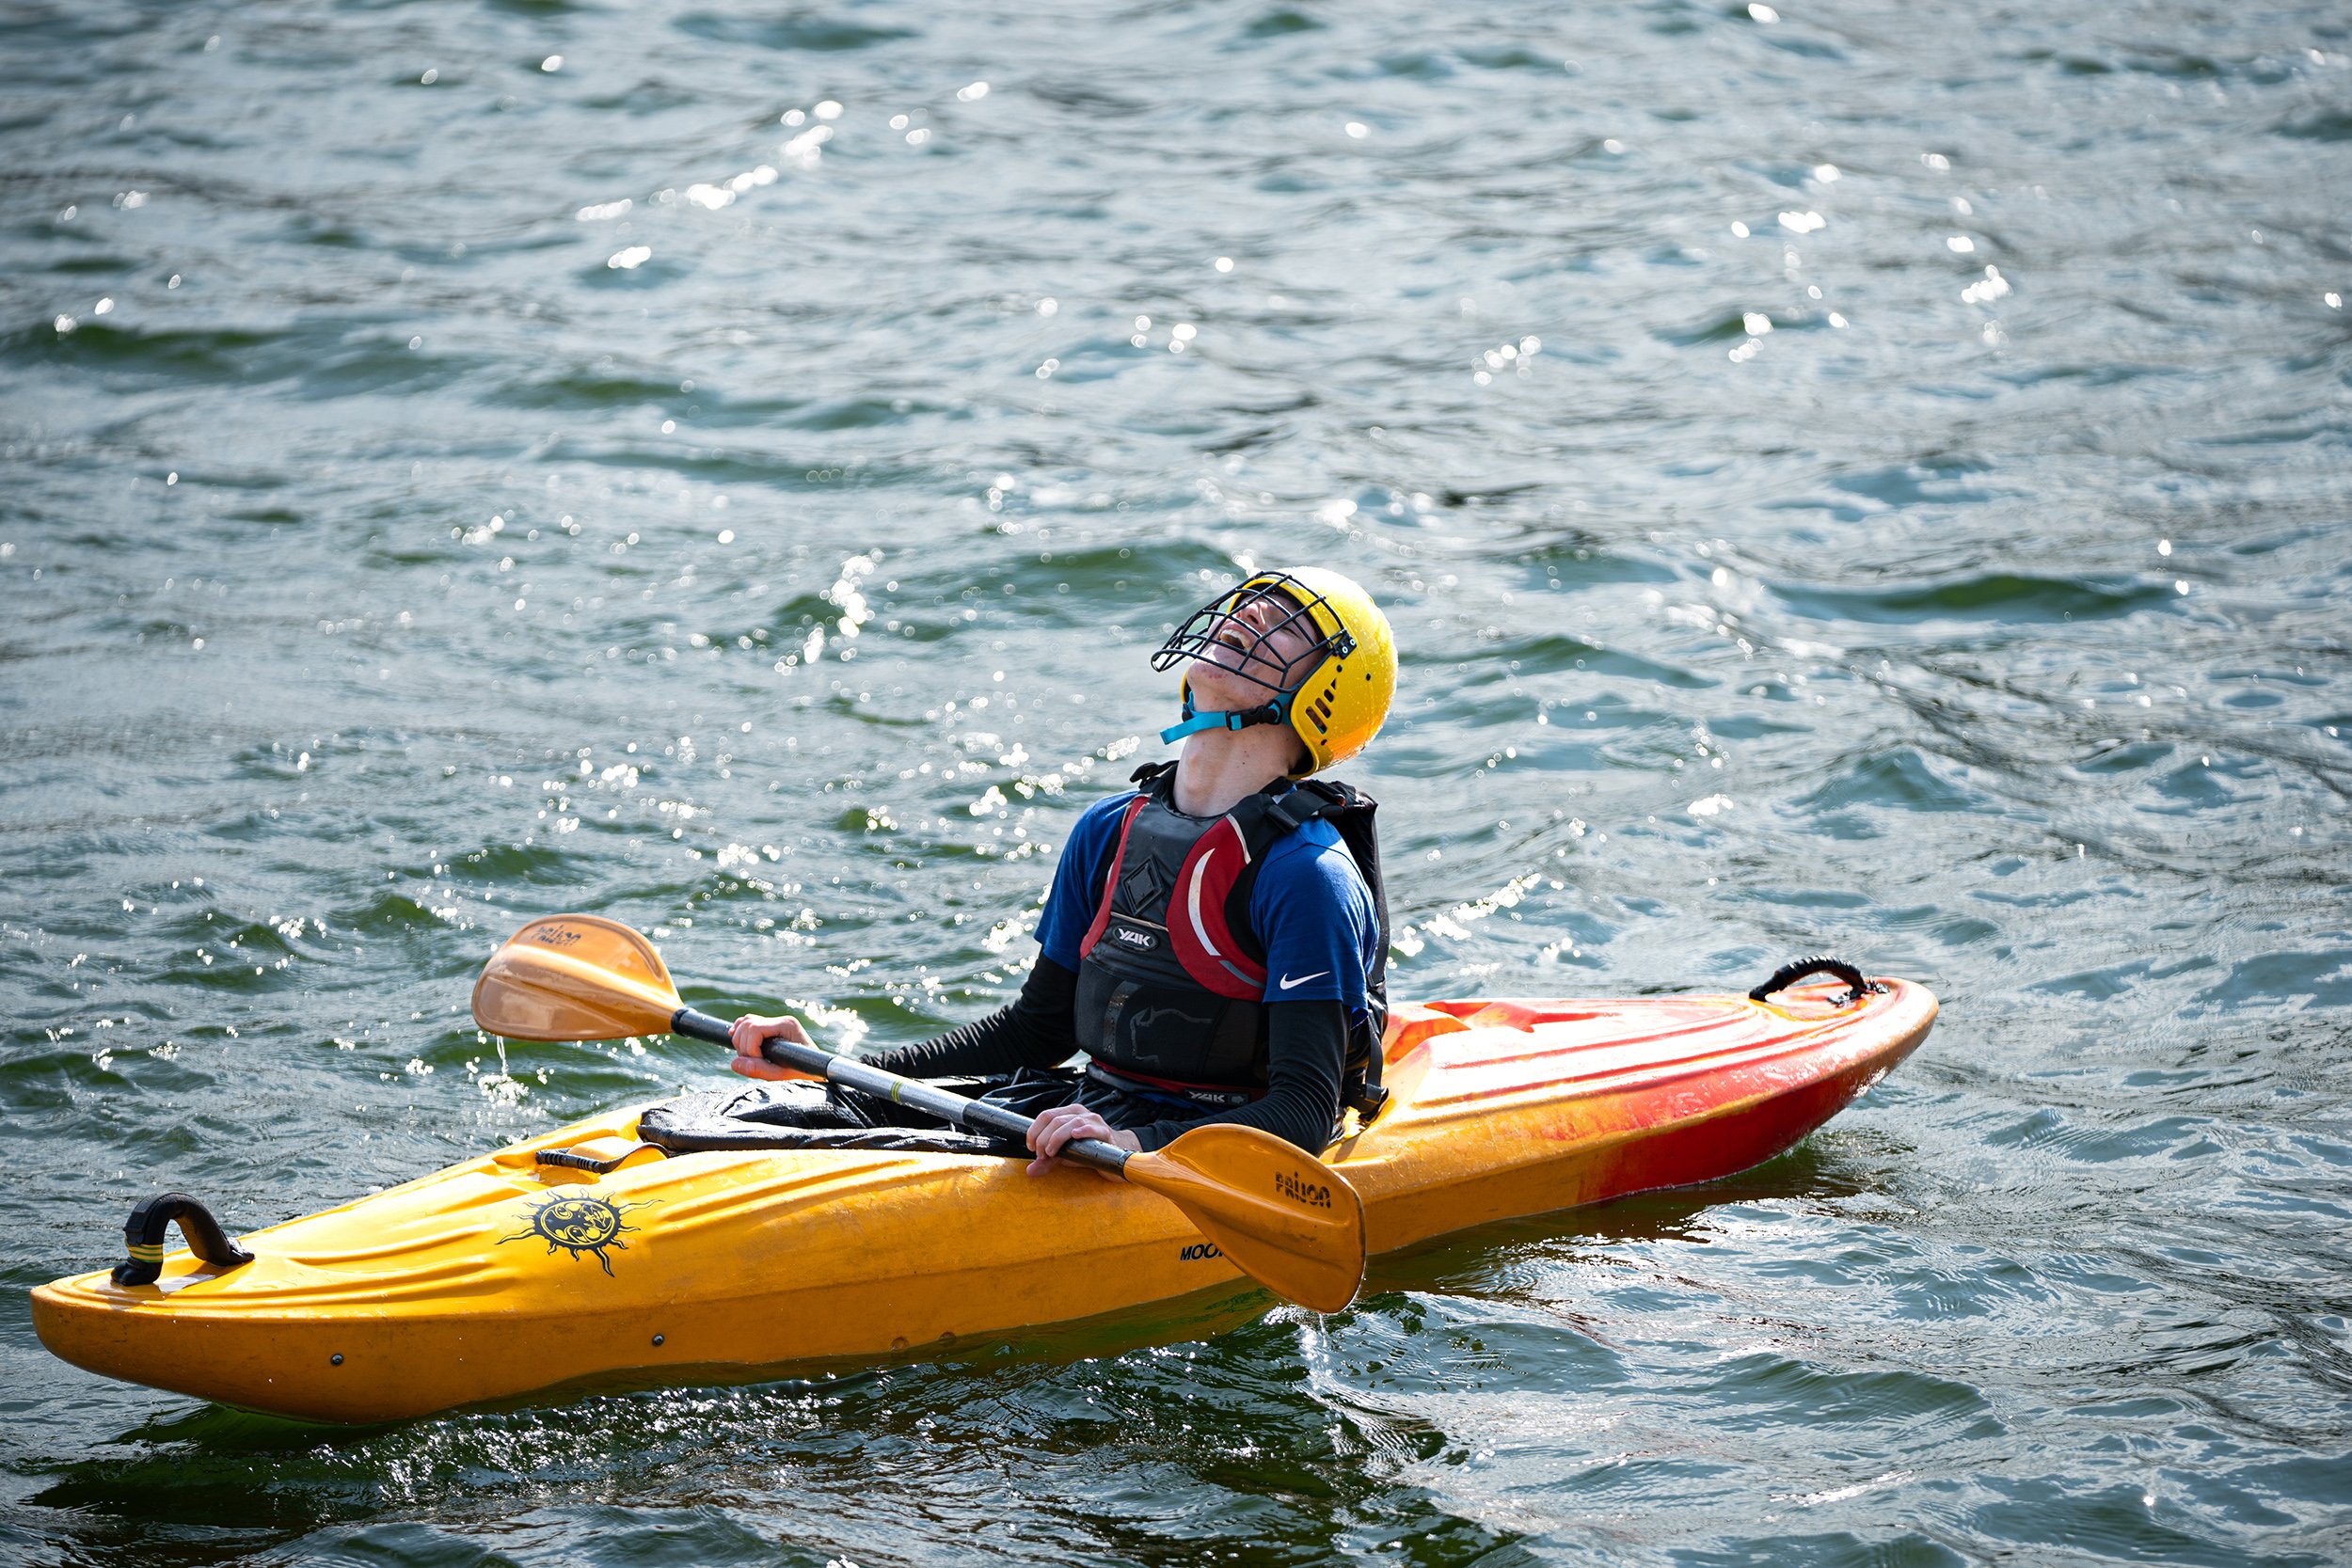 Kayaker young sportsperson enjoying their success on the water in London Nathaniel Rosa.jpg